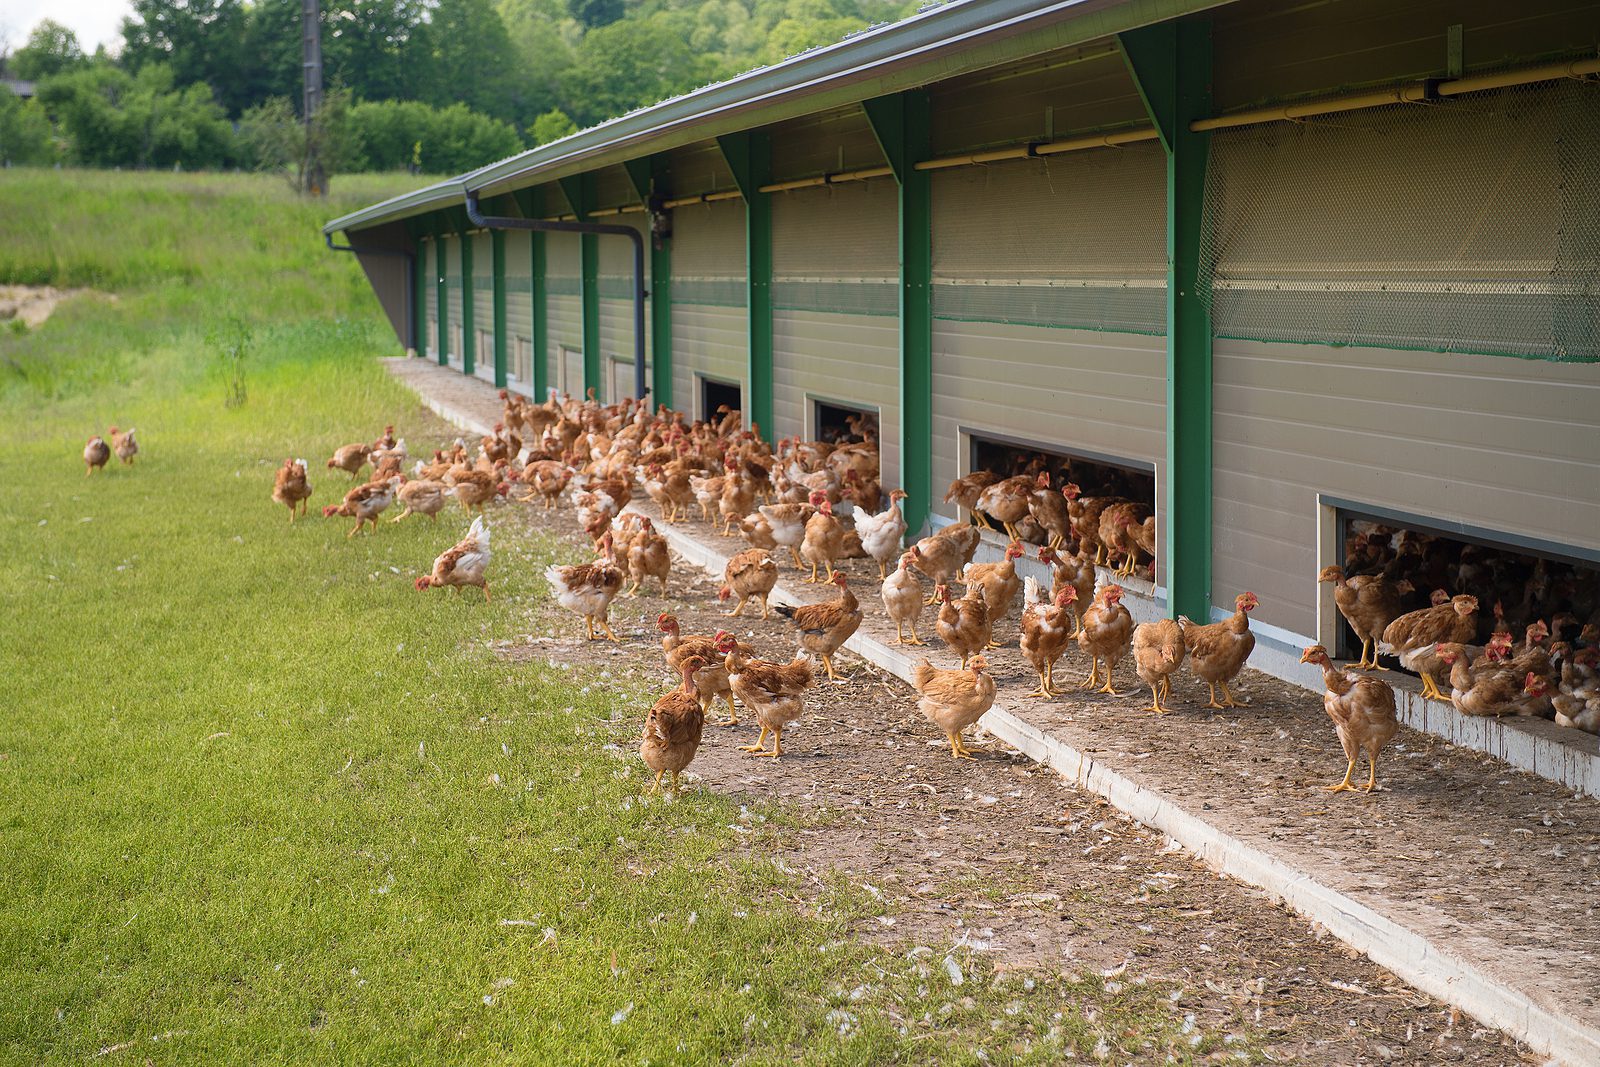 Free-range laying hens exiting the barn for outdoor access.